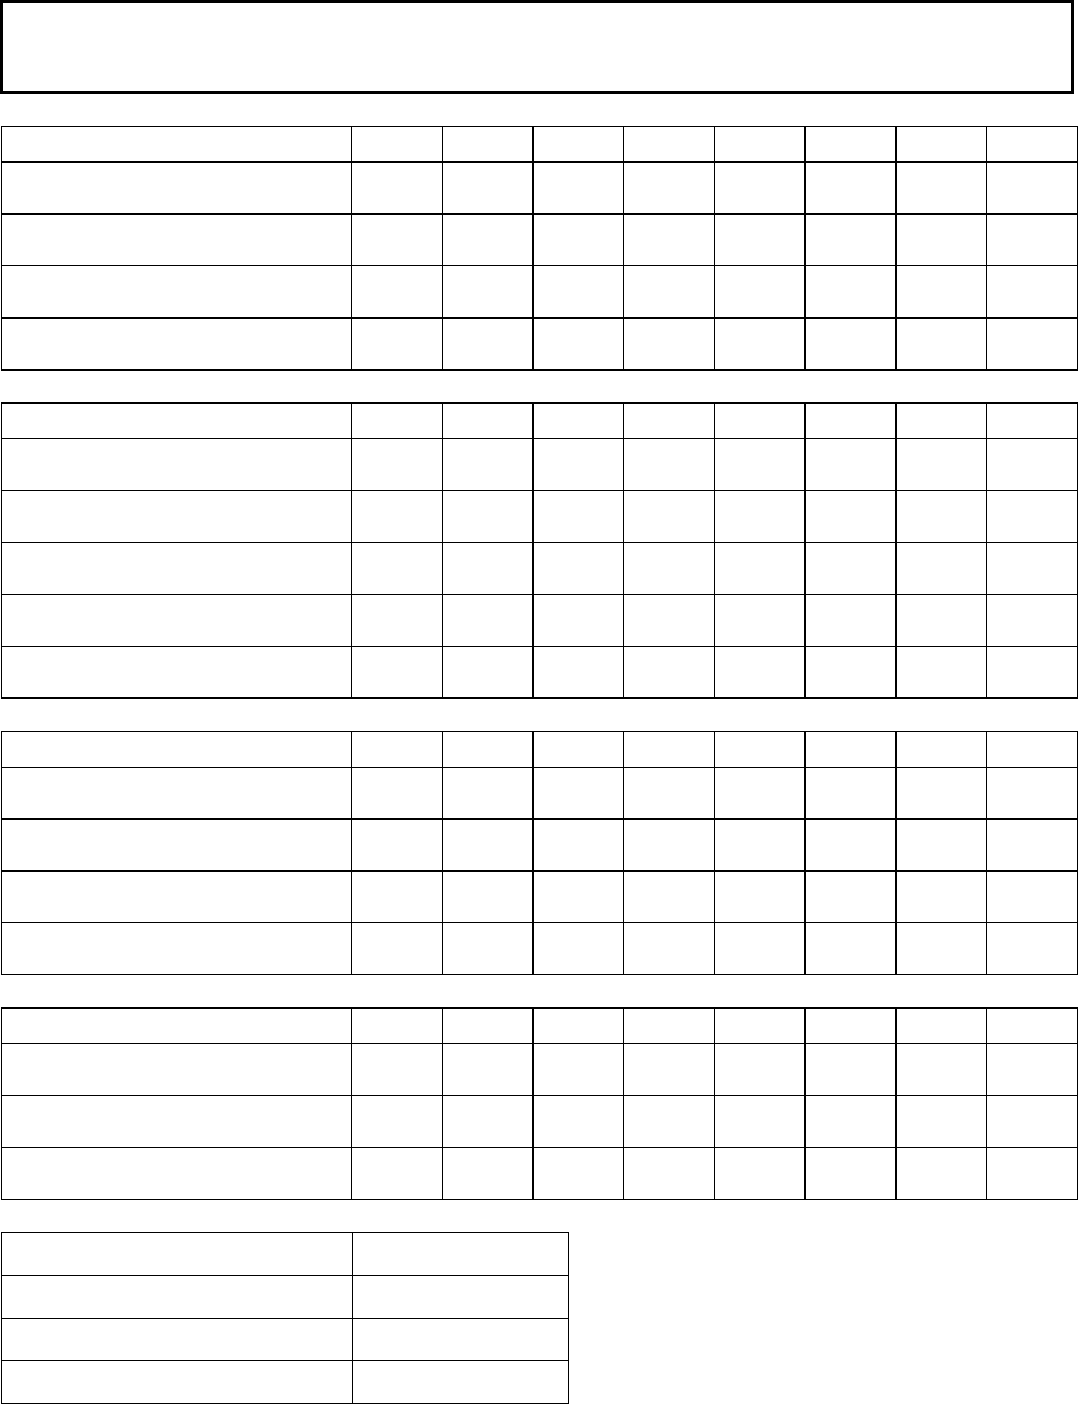 responsibility-chart-template-in-word-and-pdf-formats-page-4-of-4